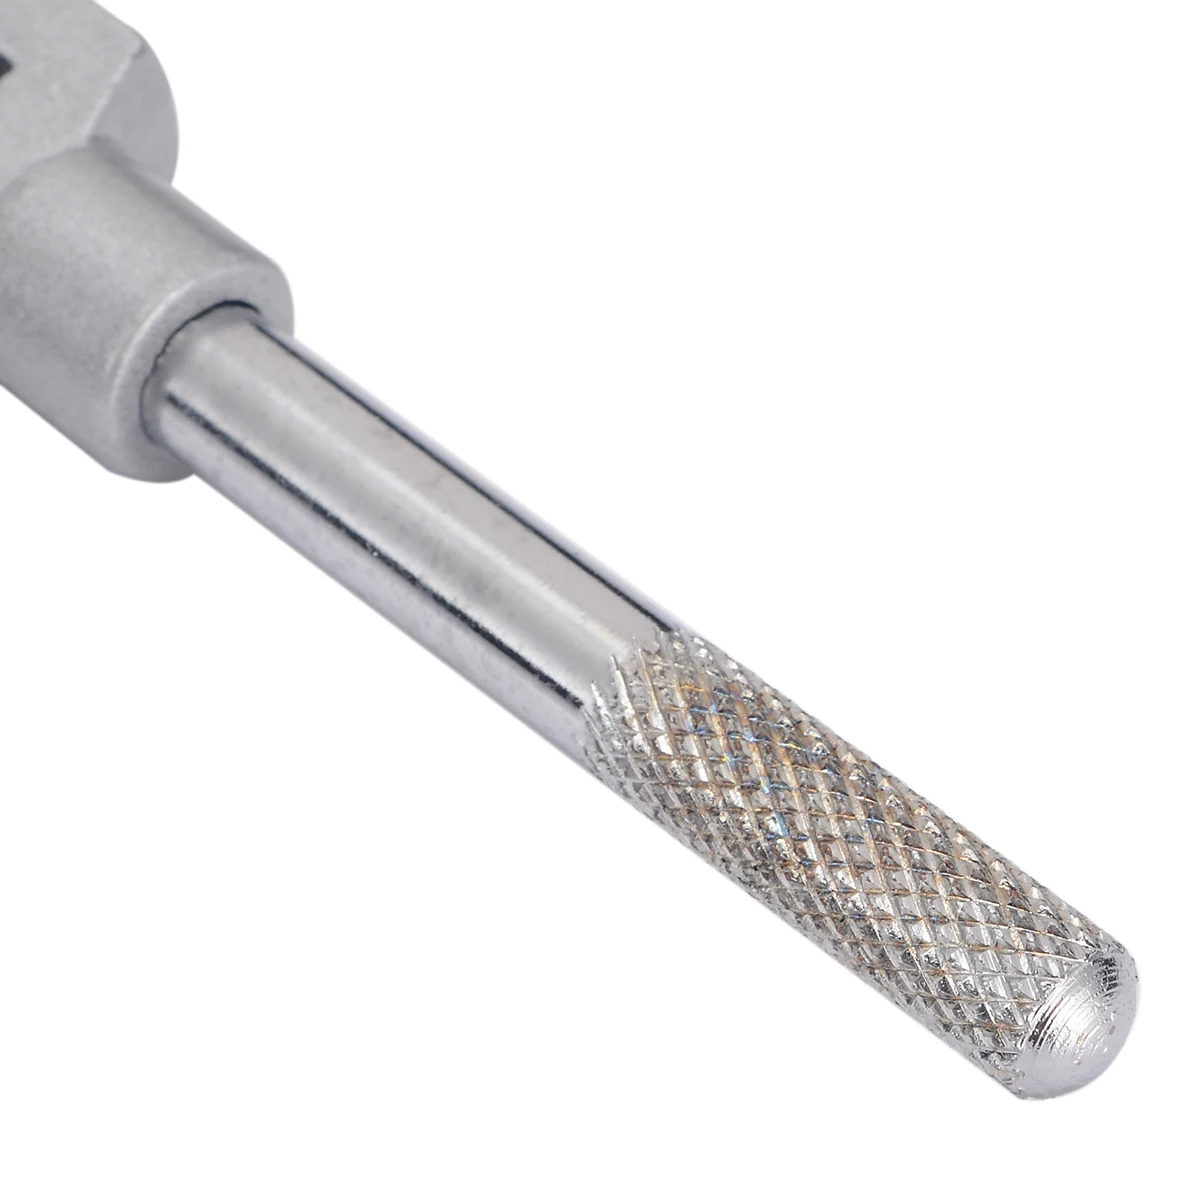 12-1/2 and 1/4-1/2 Tap Wrench and Fixed Handle and Long Body LFA/Reichel Hardware #12-1/2 Tap Wrench No 